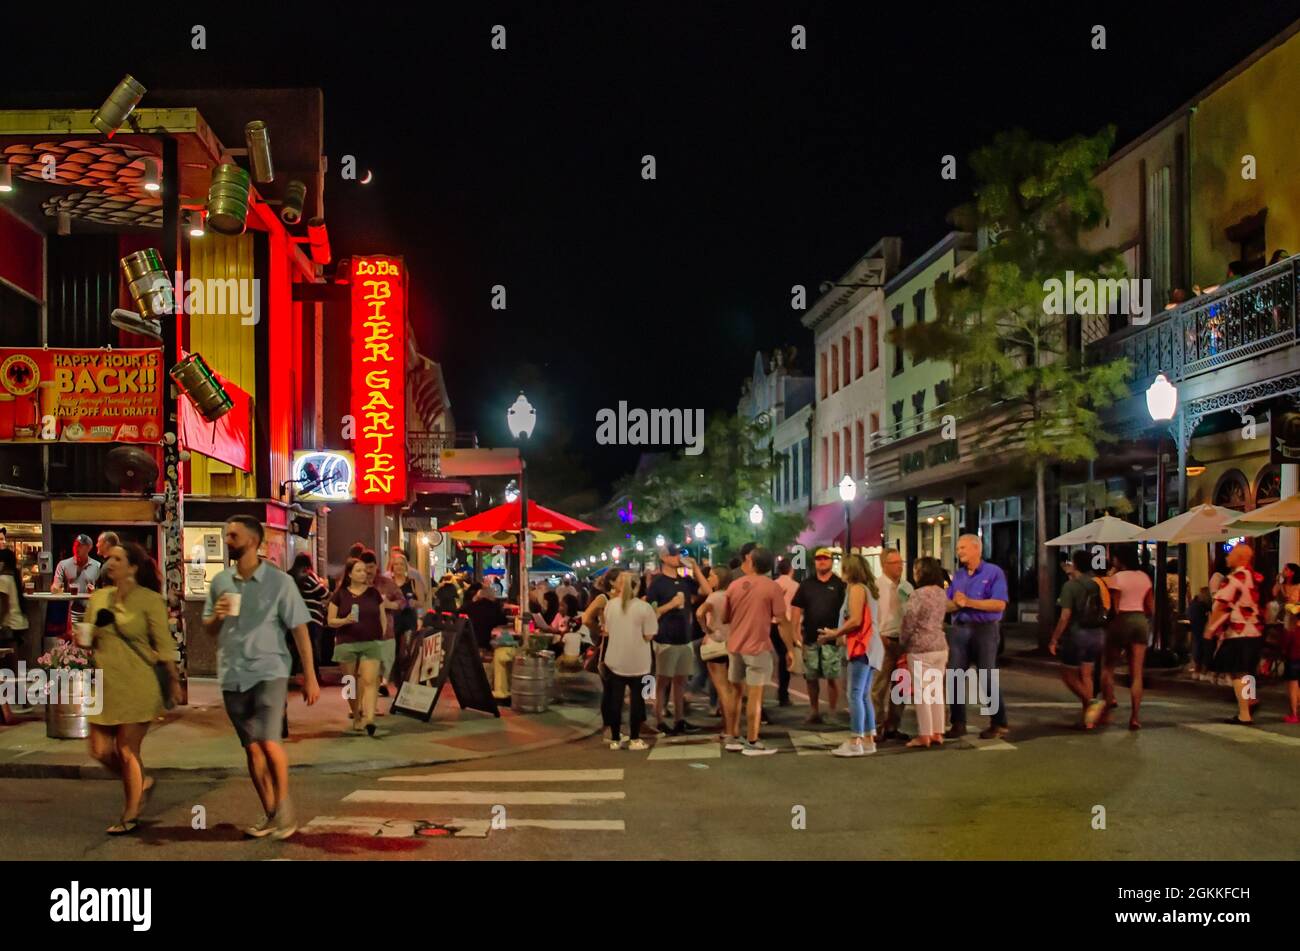 People gather on Dauphin Street during the Second Friday Art Walk, Sept. 10, 2021, in Mobile, Alabama. Stock Photo